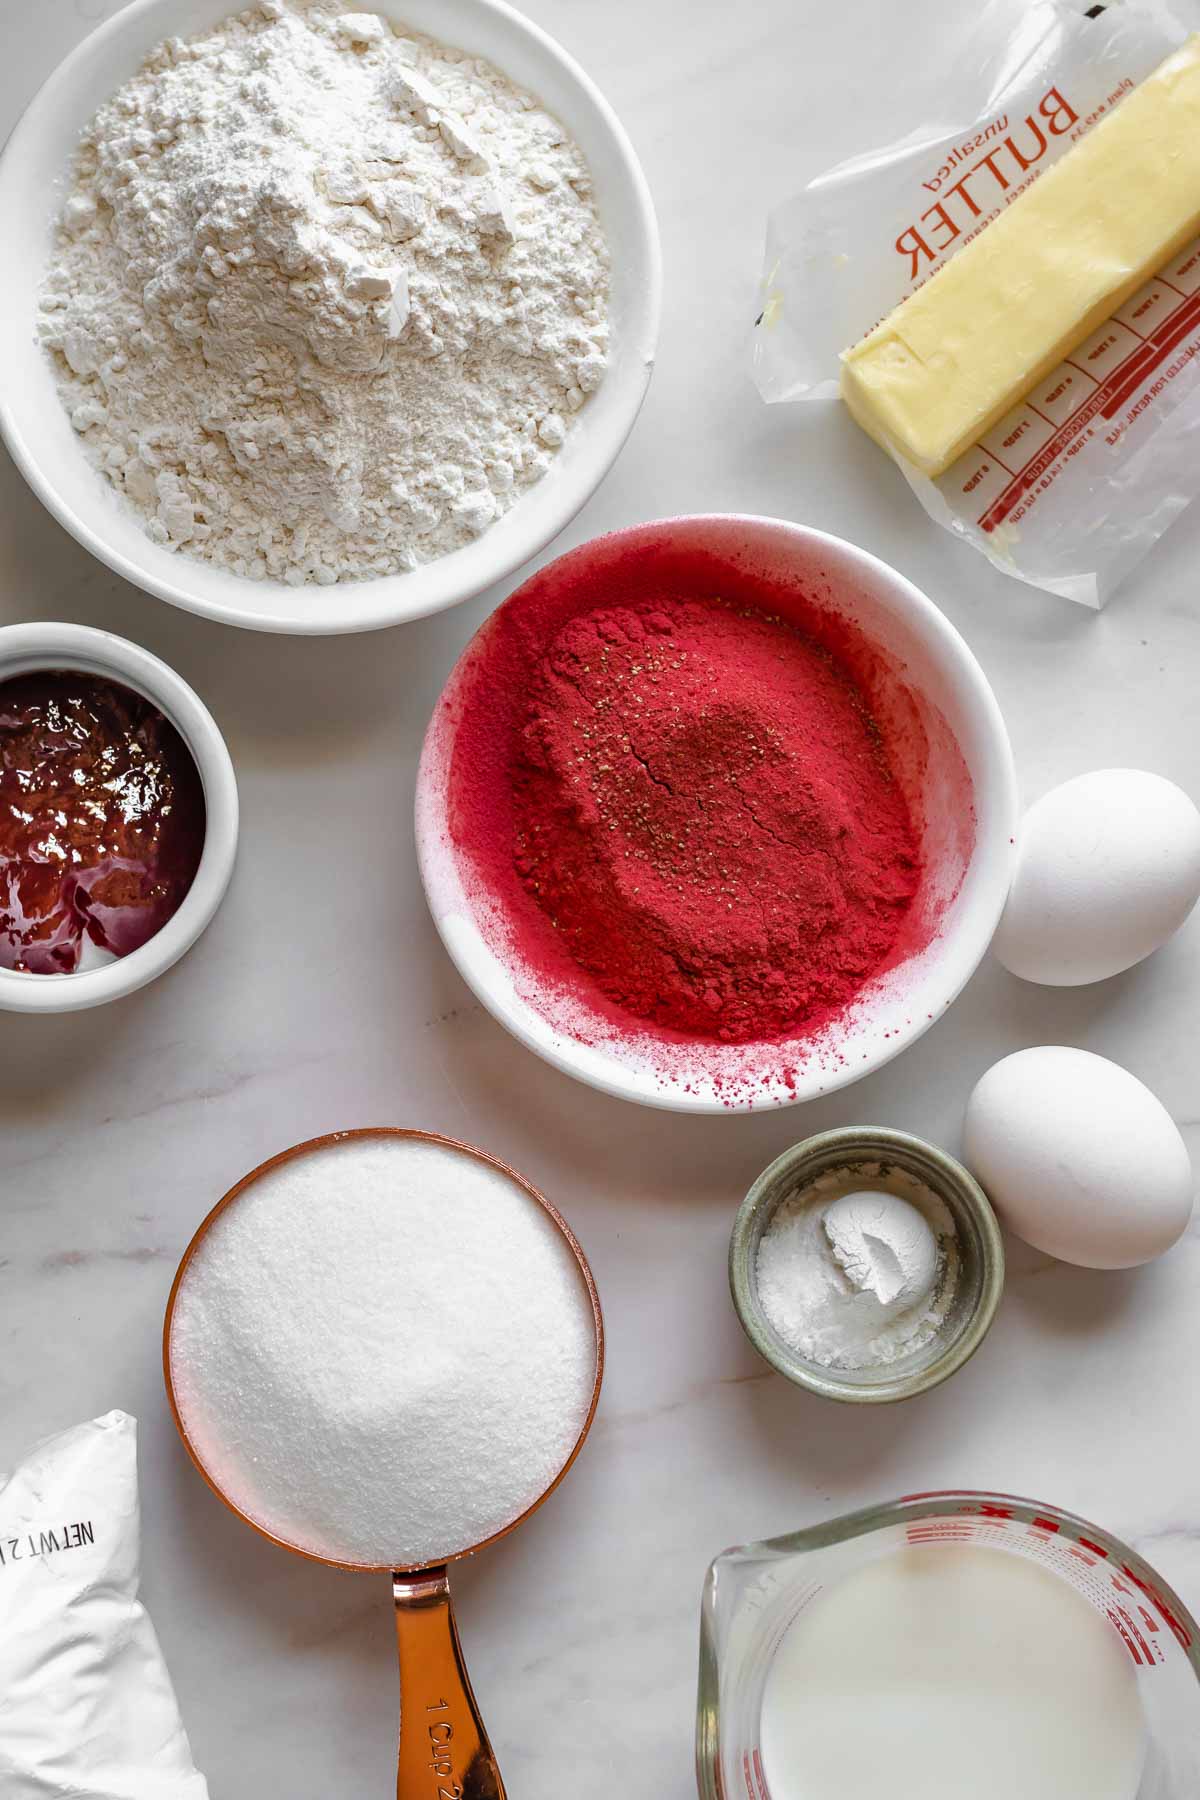 Ingredients for the strawberry whoopie pies.